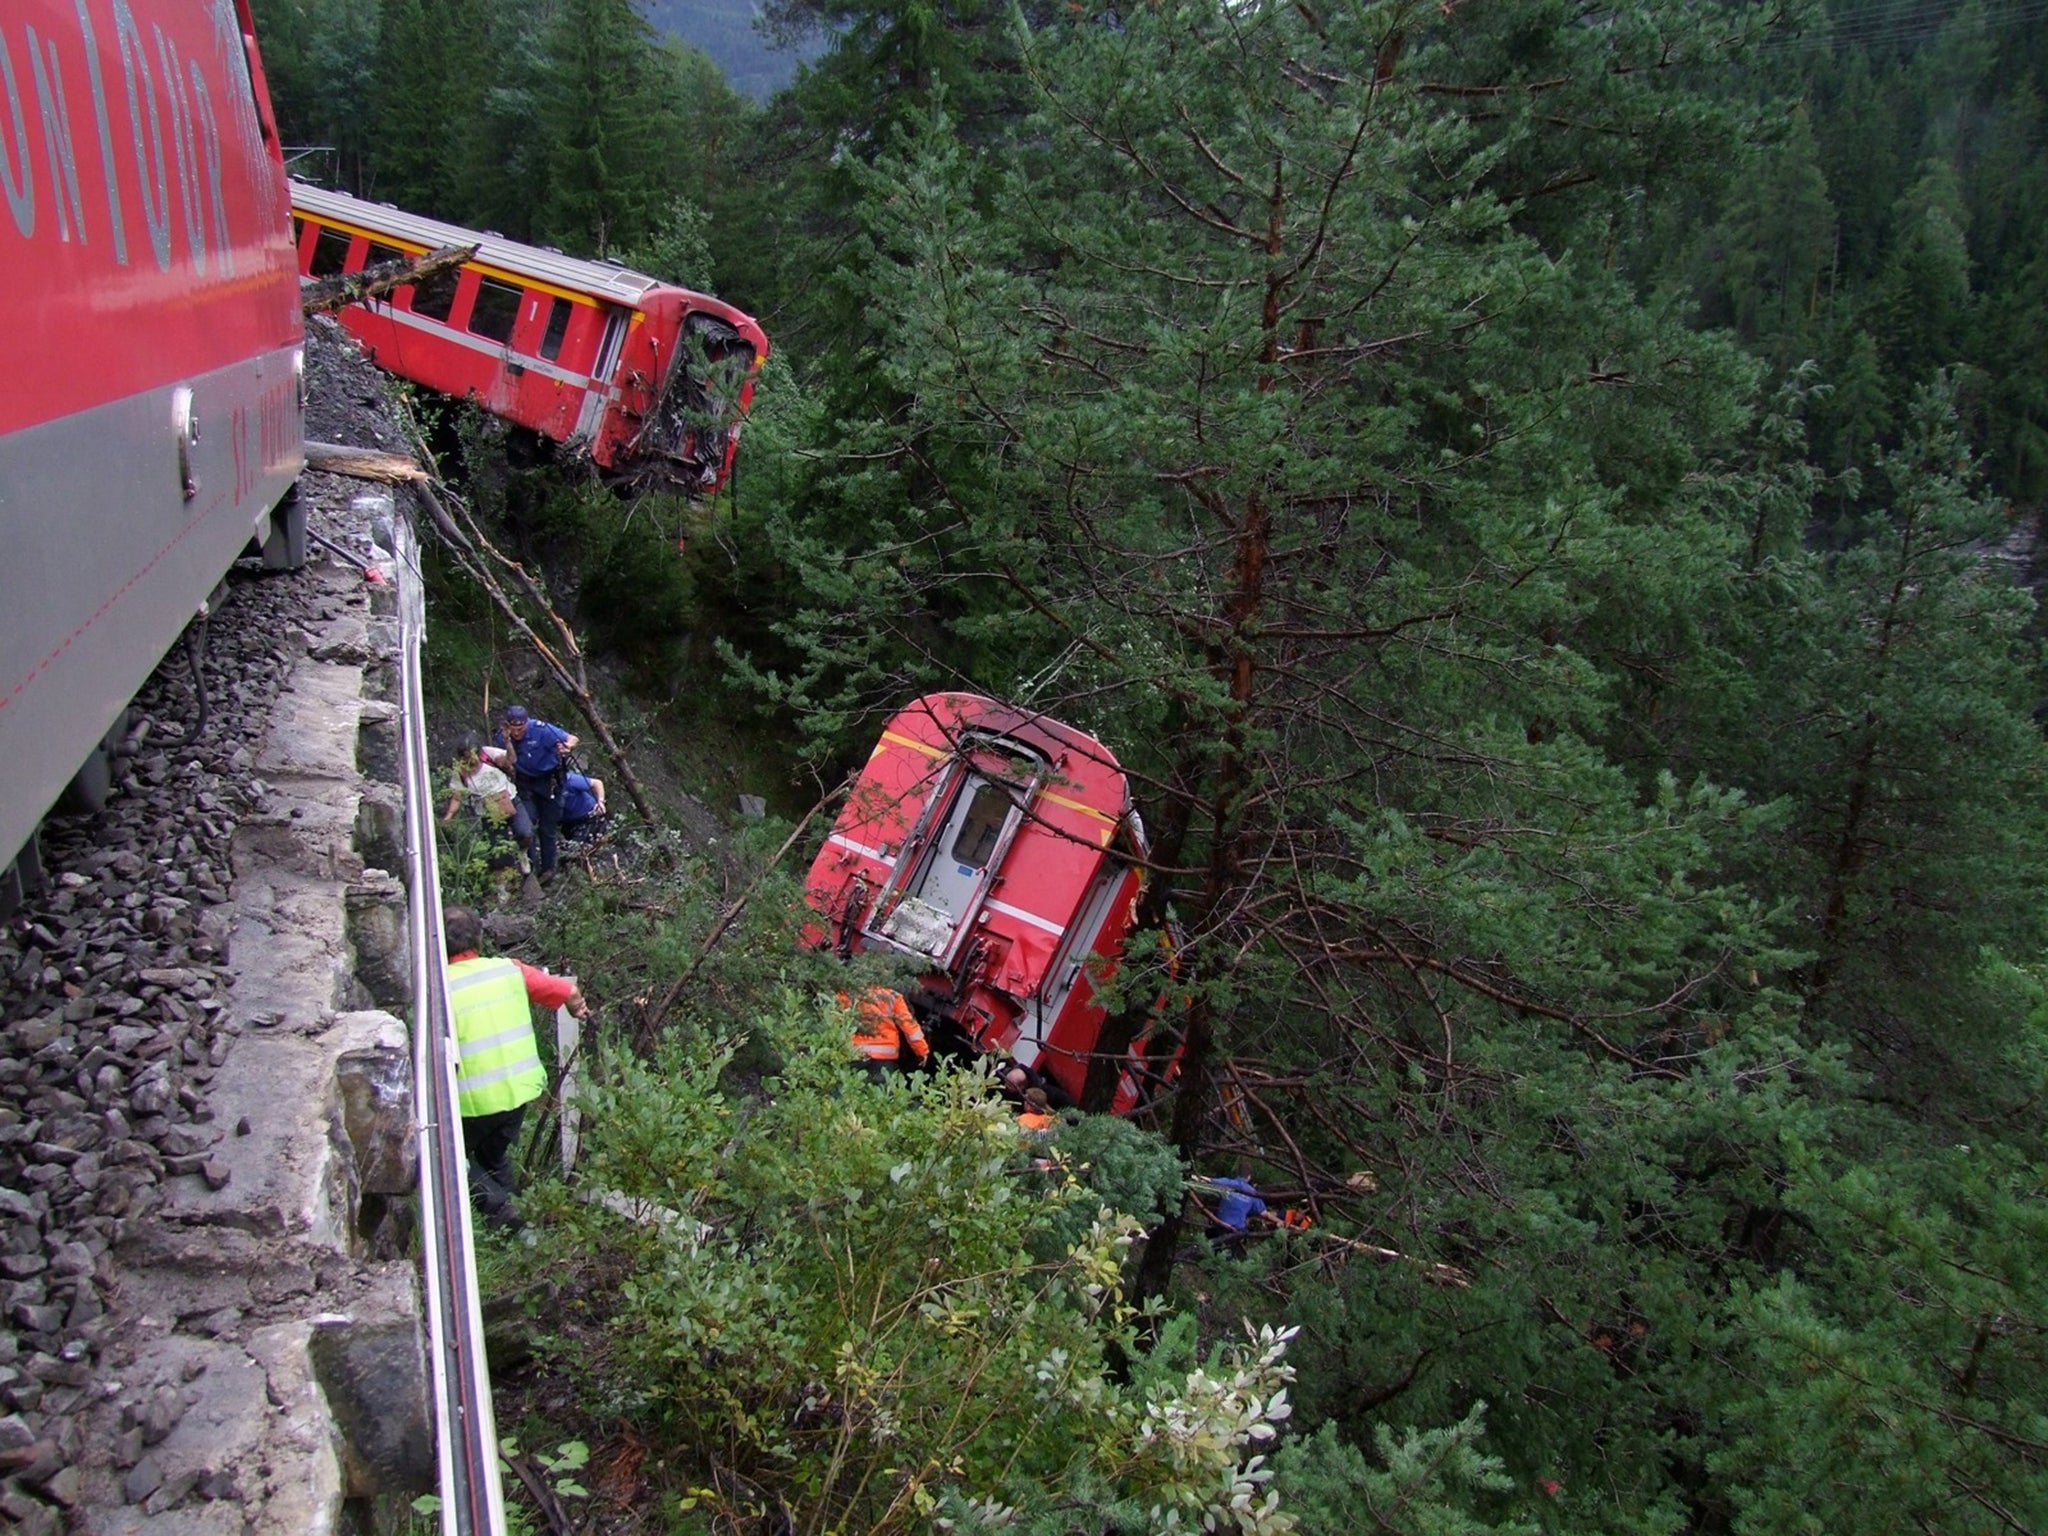 Police and rescue workers help after a passenger train derailed into a ravine near Tiefencastel in a mountainous region of southeastern Switzerland after encountering a mudslide on the tracks